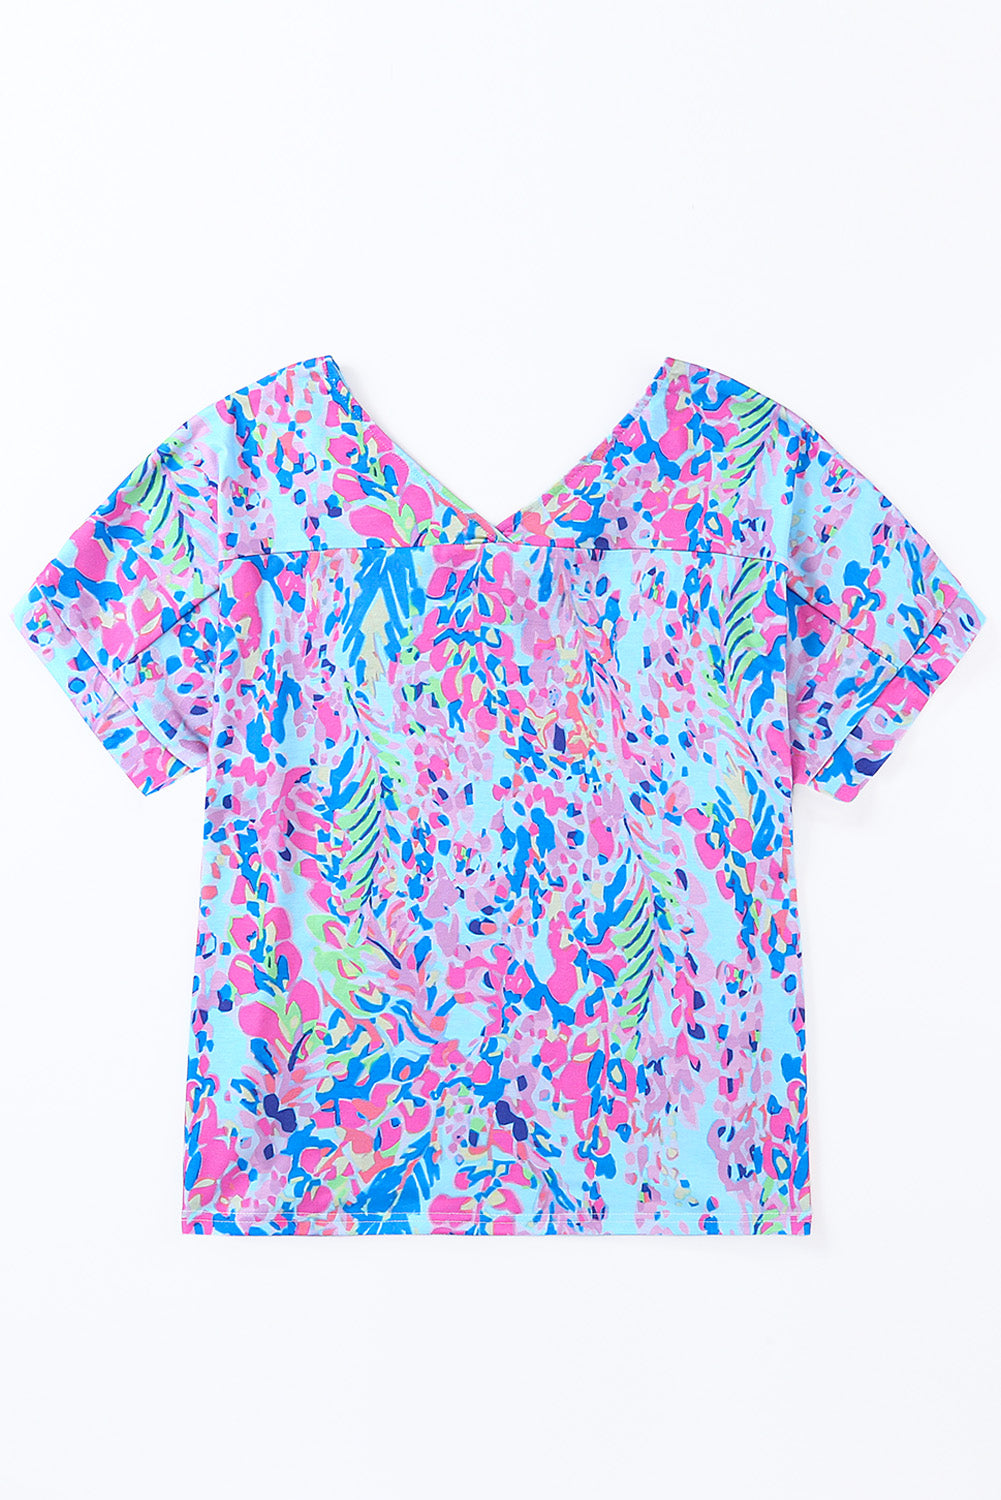 Green Loose Painted Floral Tee-Sale (50% OFF)/$2.99 SALE-[Adult]-[Female]-2022 Online Blue Zone Planet